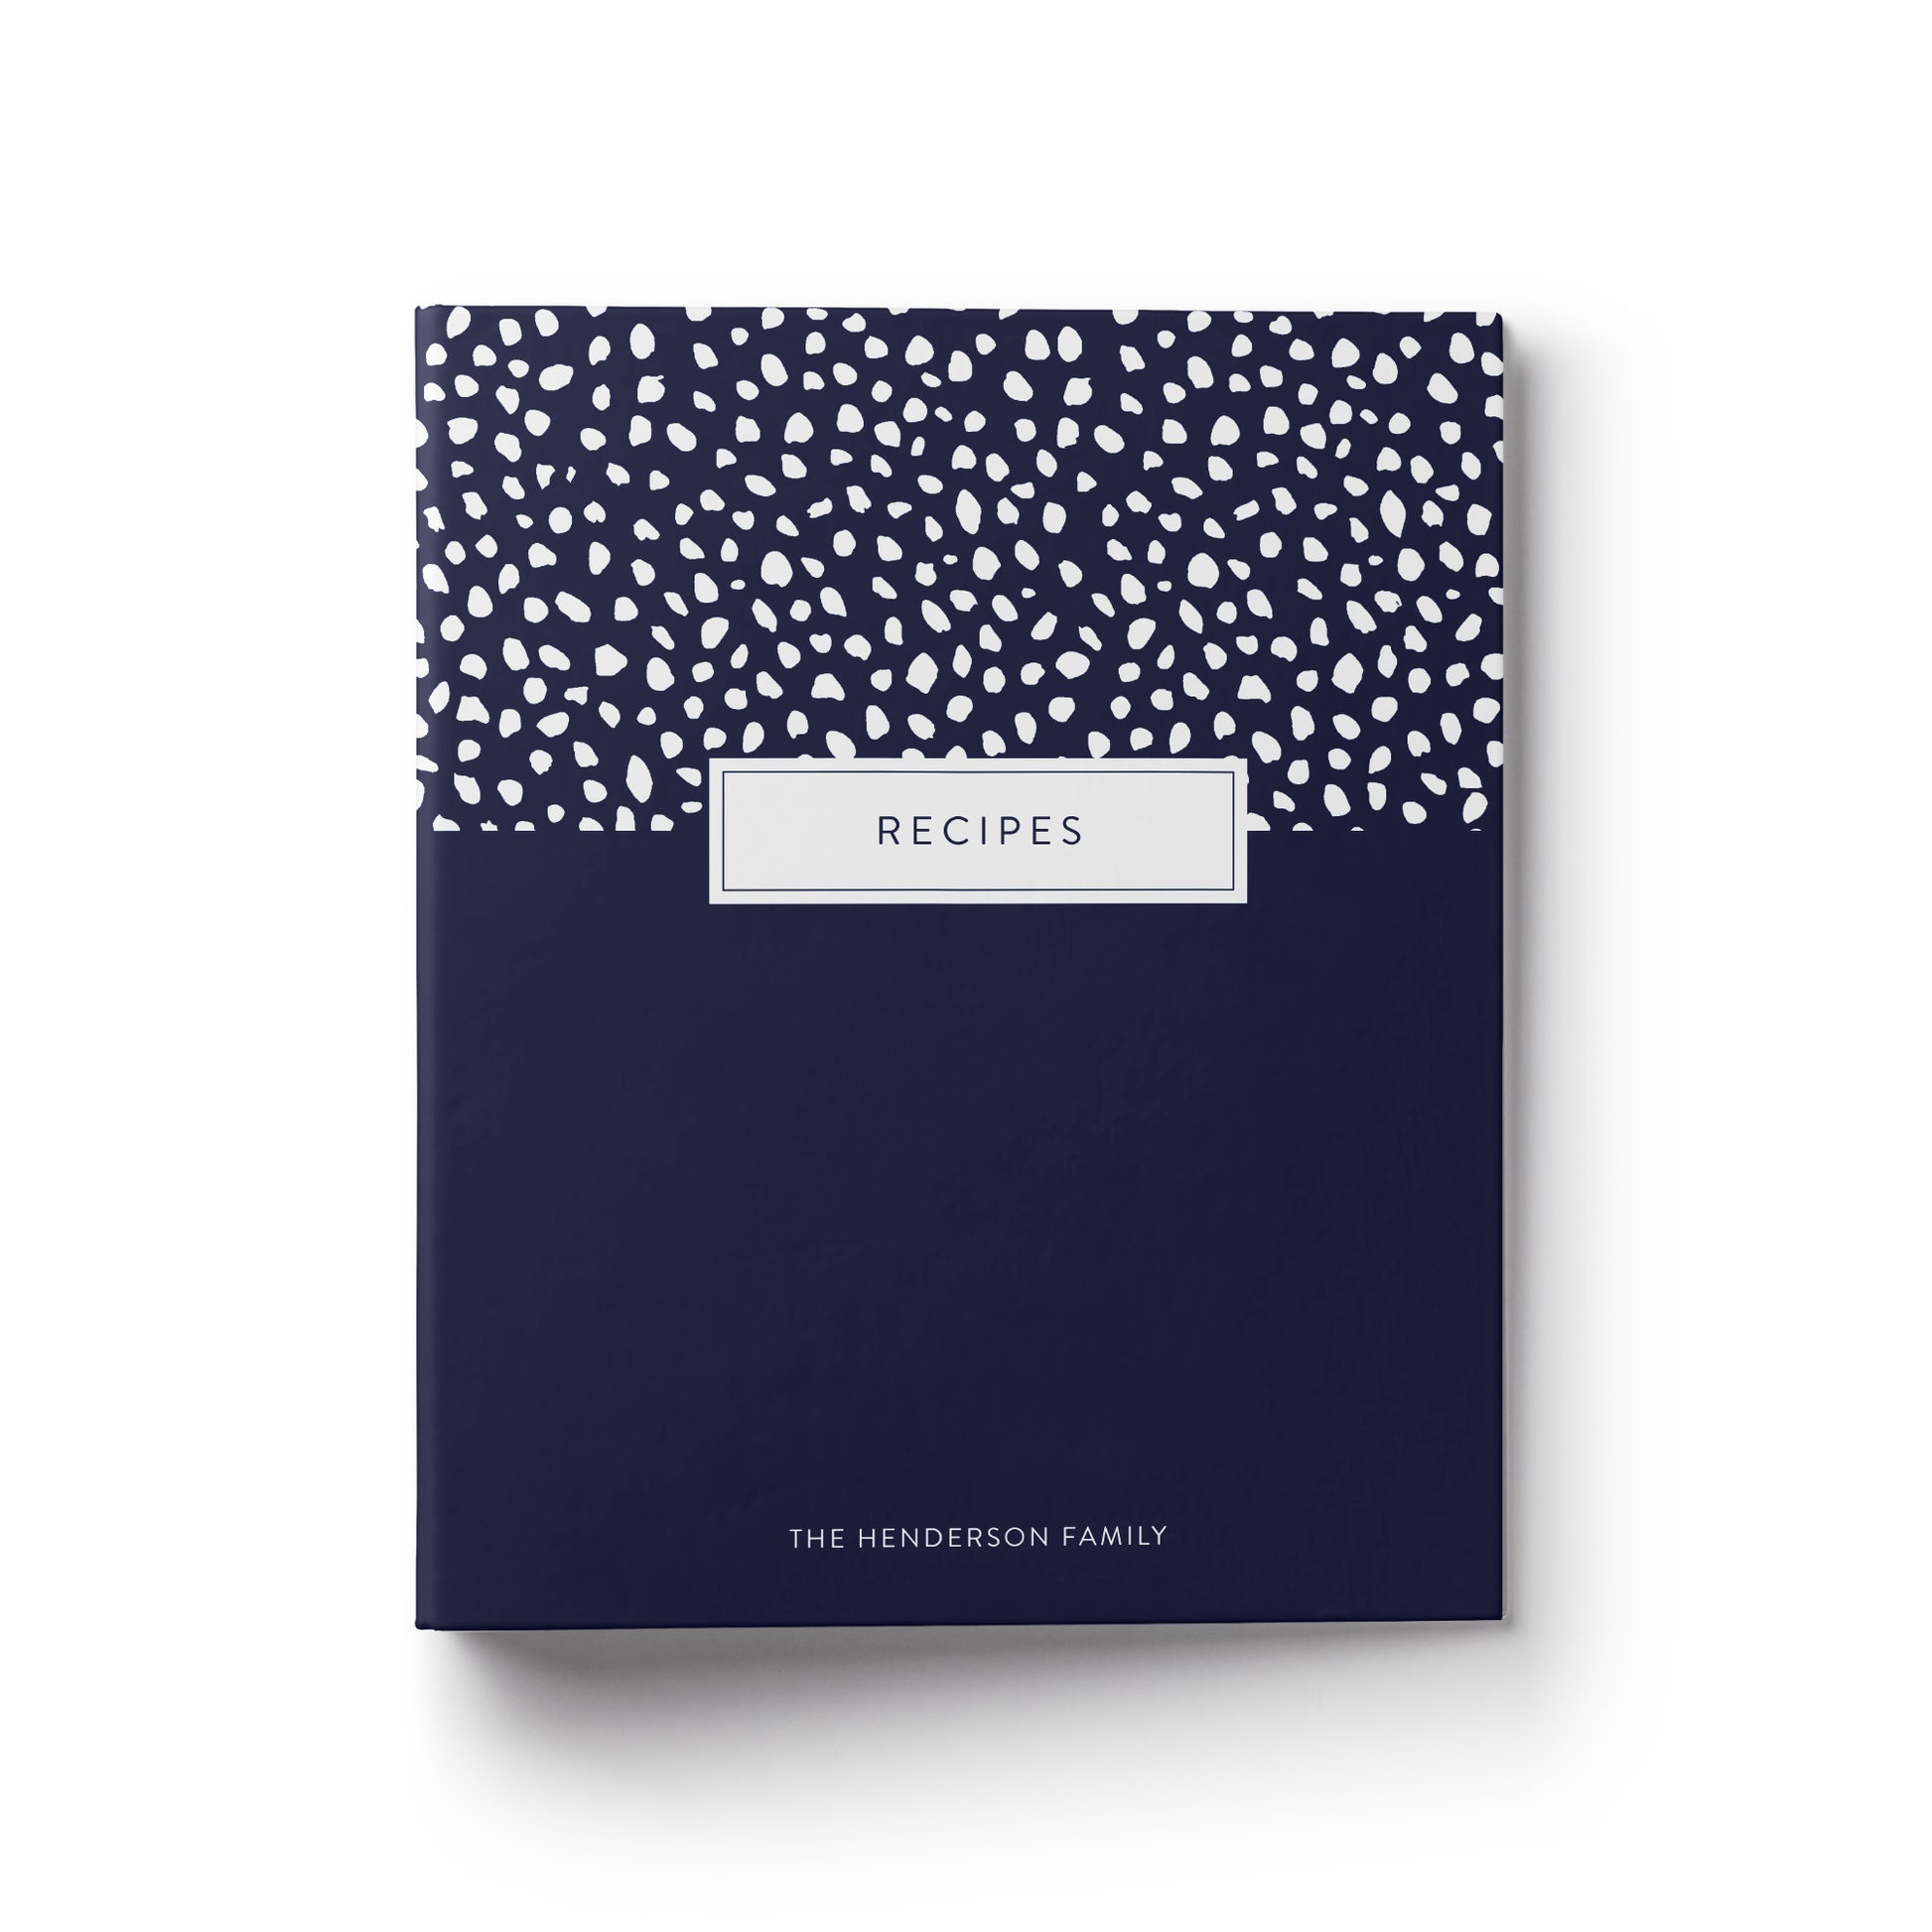 A spotted dot custom recipe binder makes the perfect gift for any occasion